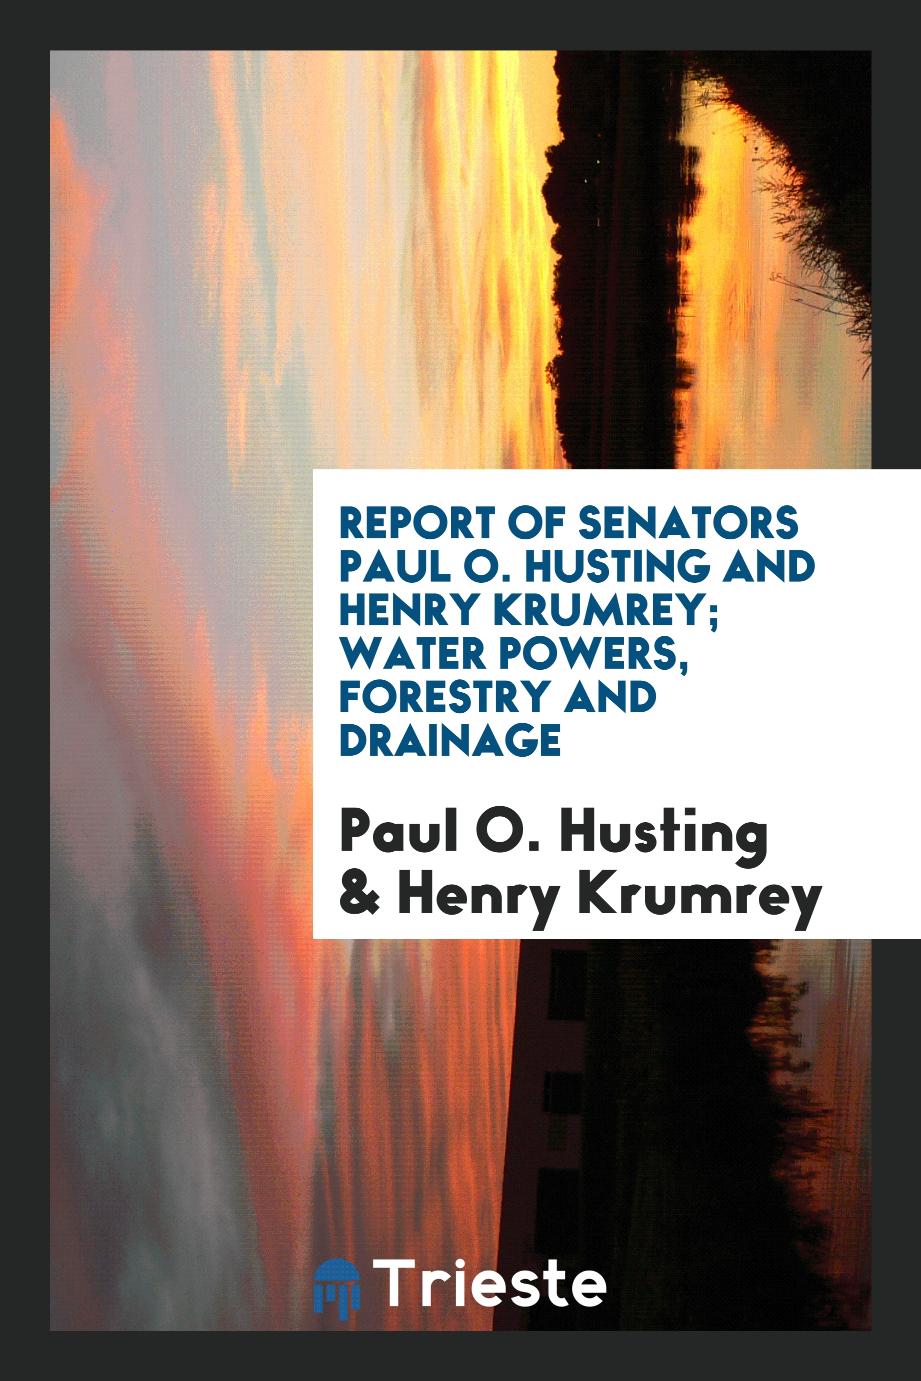 Report of Senators Paul O. Husting and Henry Krumrey; Water Powers, Forestry and Drainage